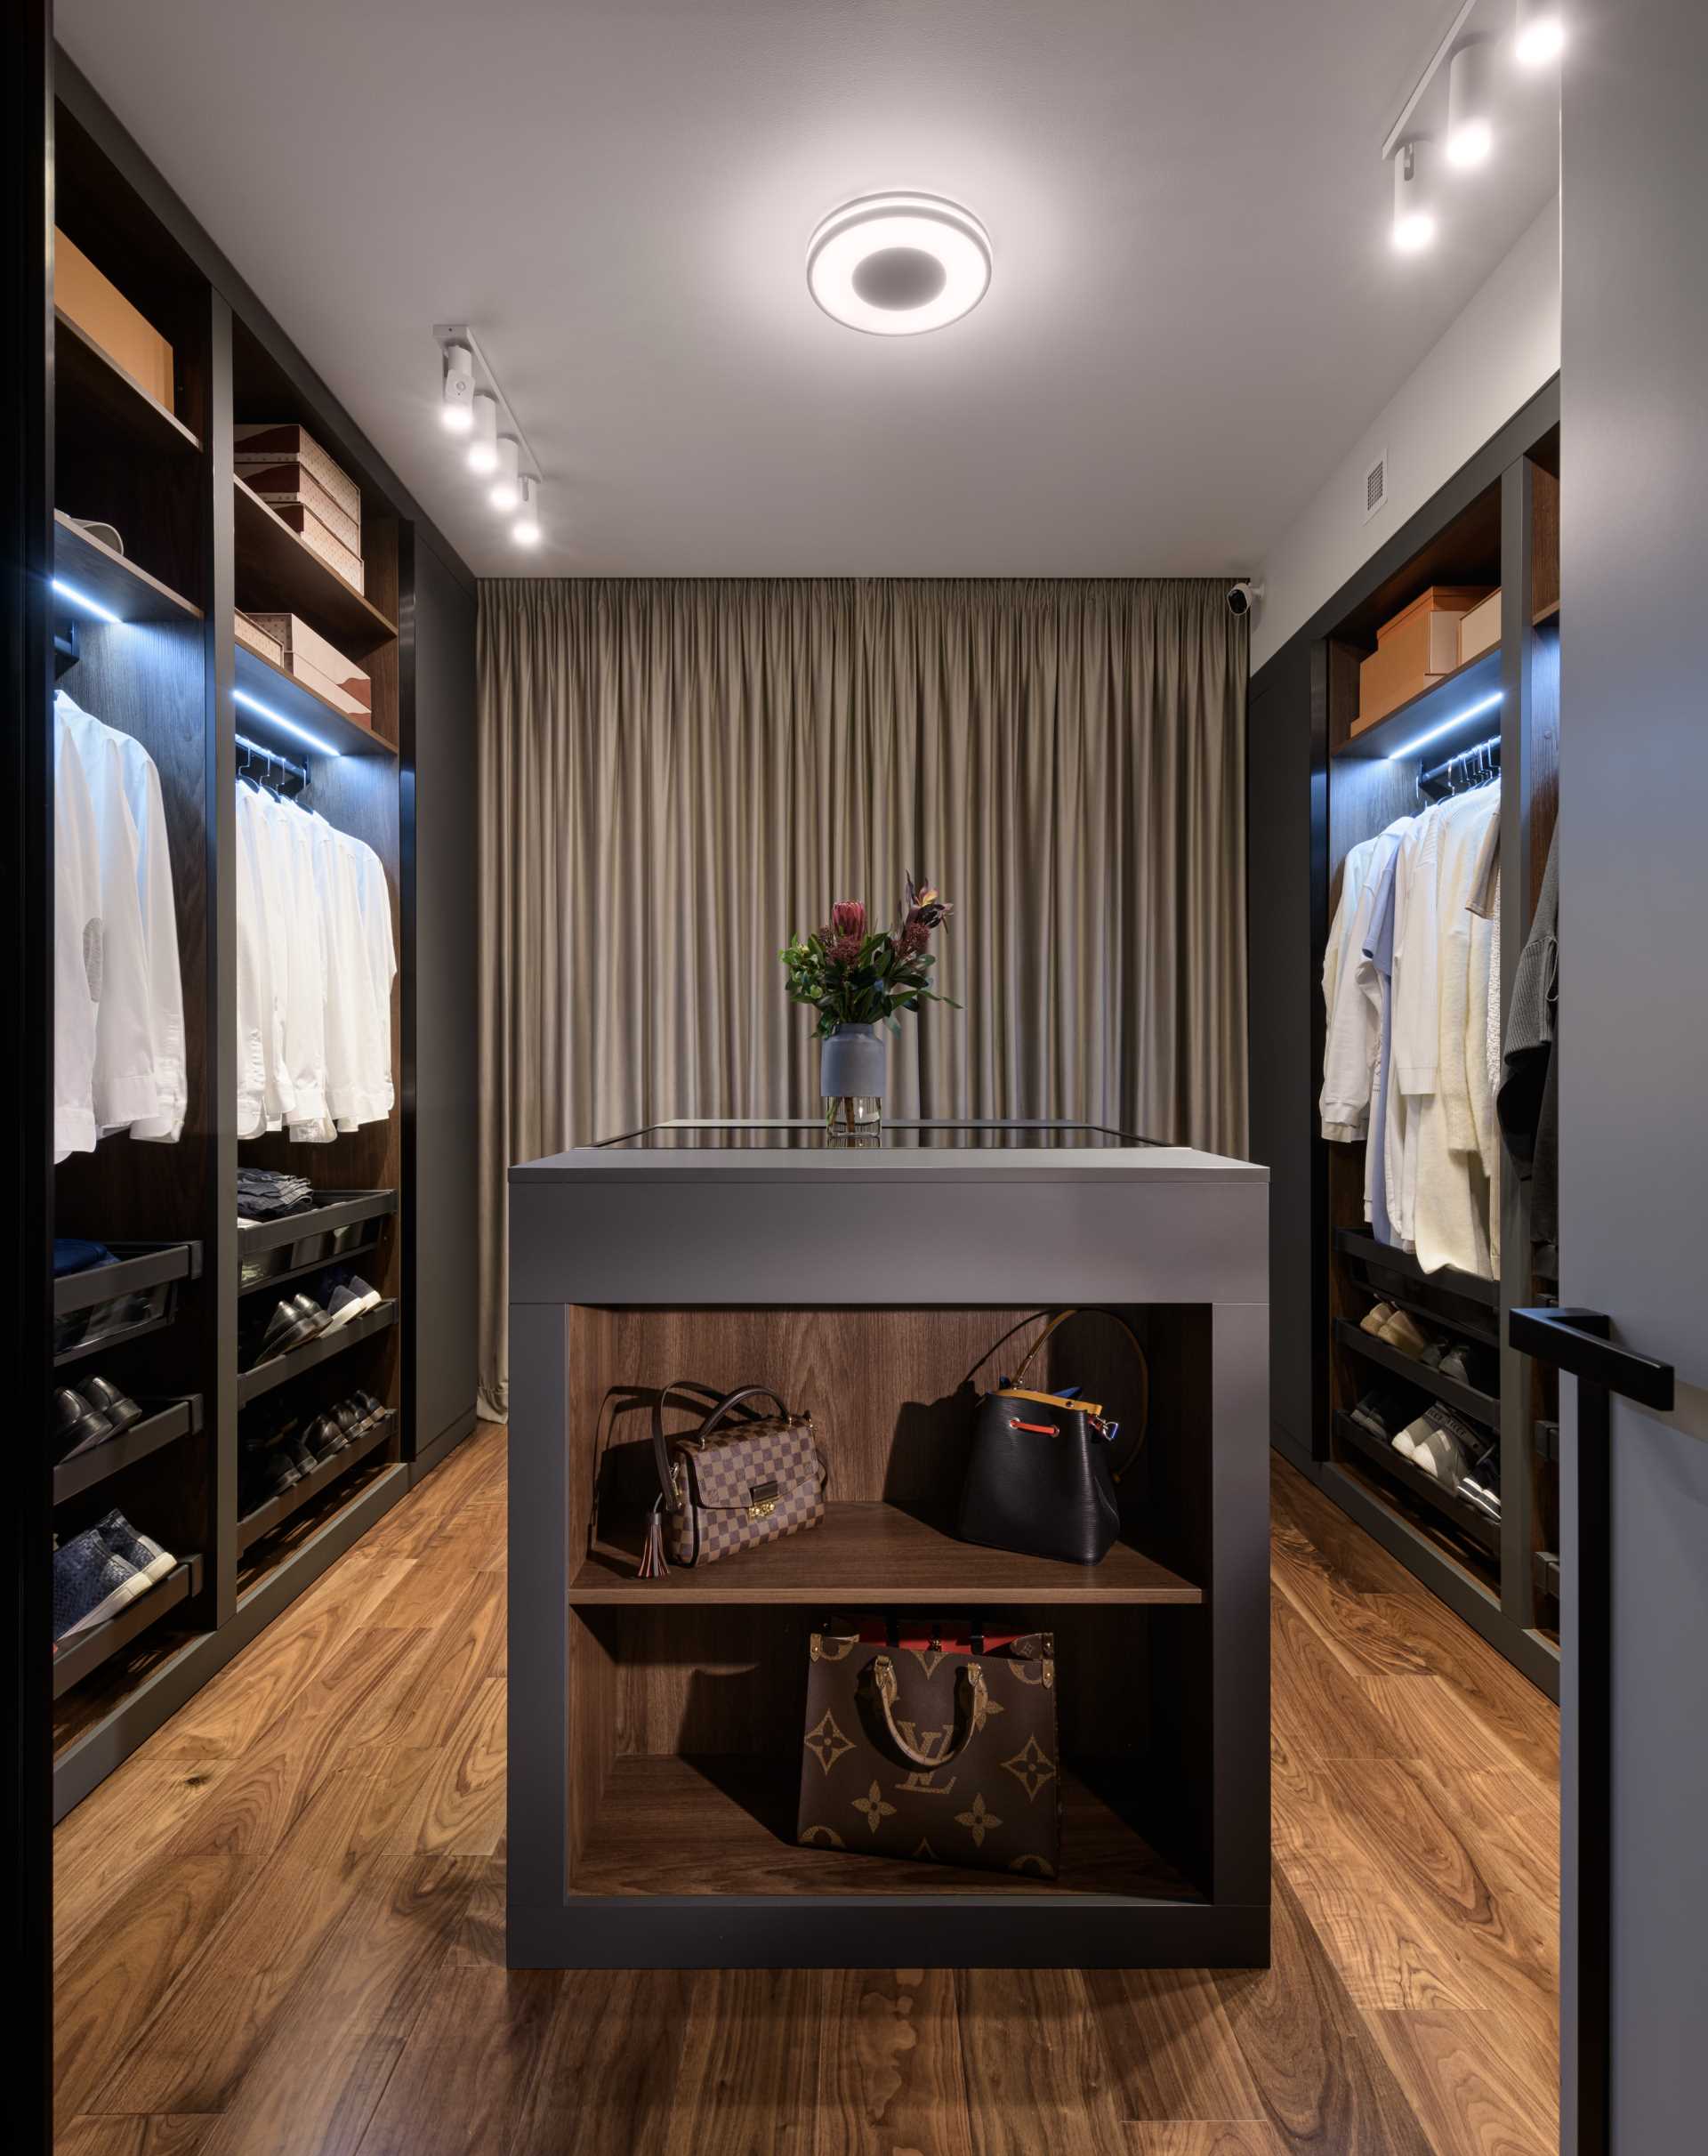 A walk-in closet has a central island filled with storage for accessories, while the walls are dedicated to clothing and shoe storage.